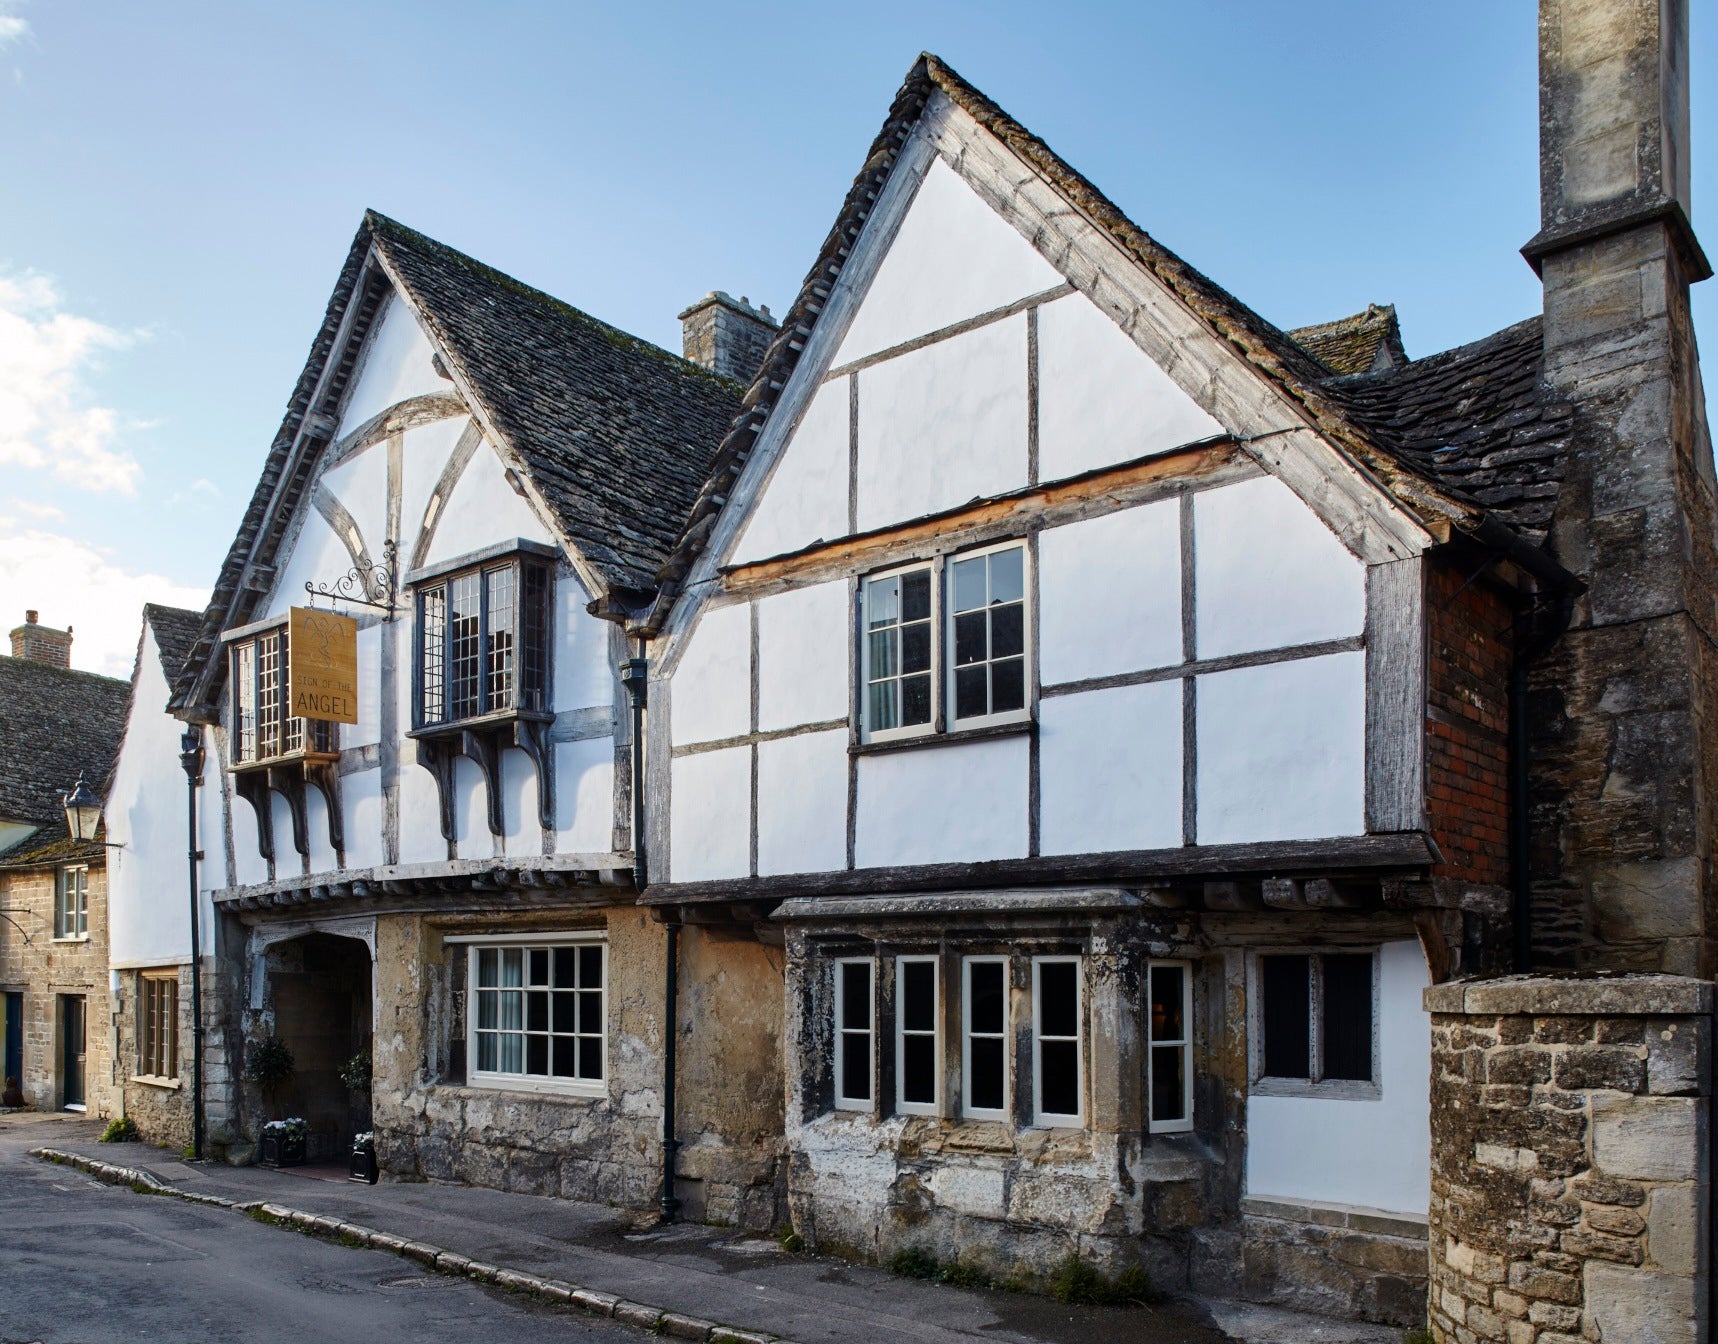 With five character-filled rooms, the decor of this 15th-century inn is homely and restrained